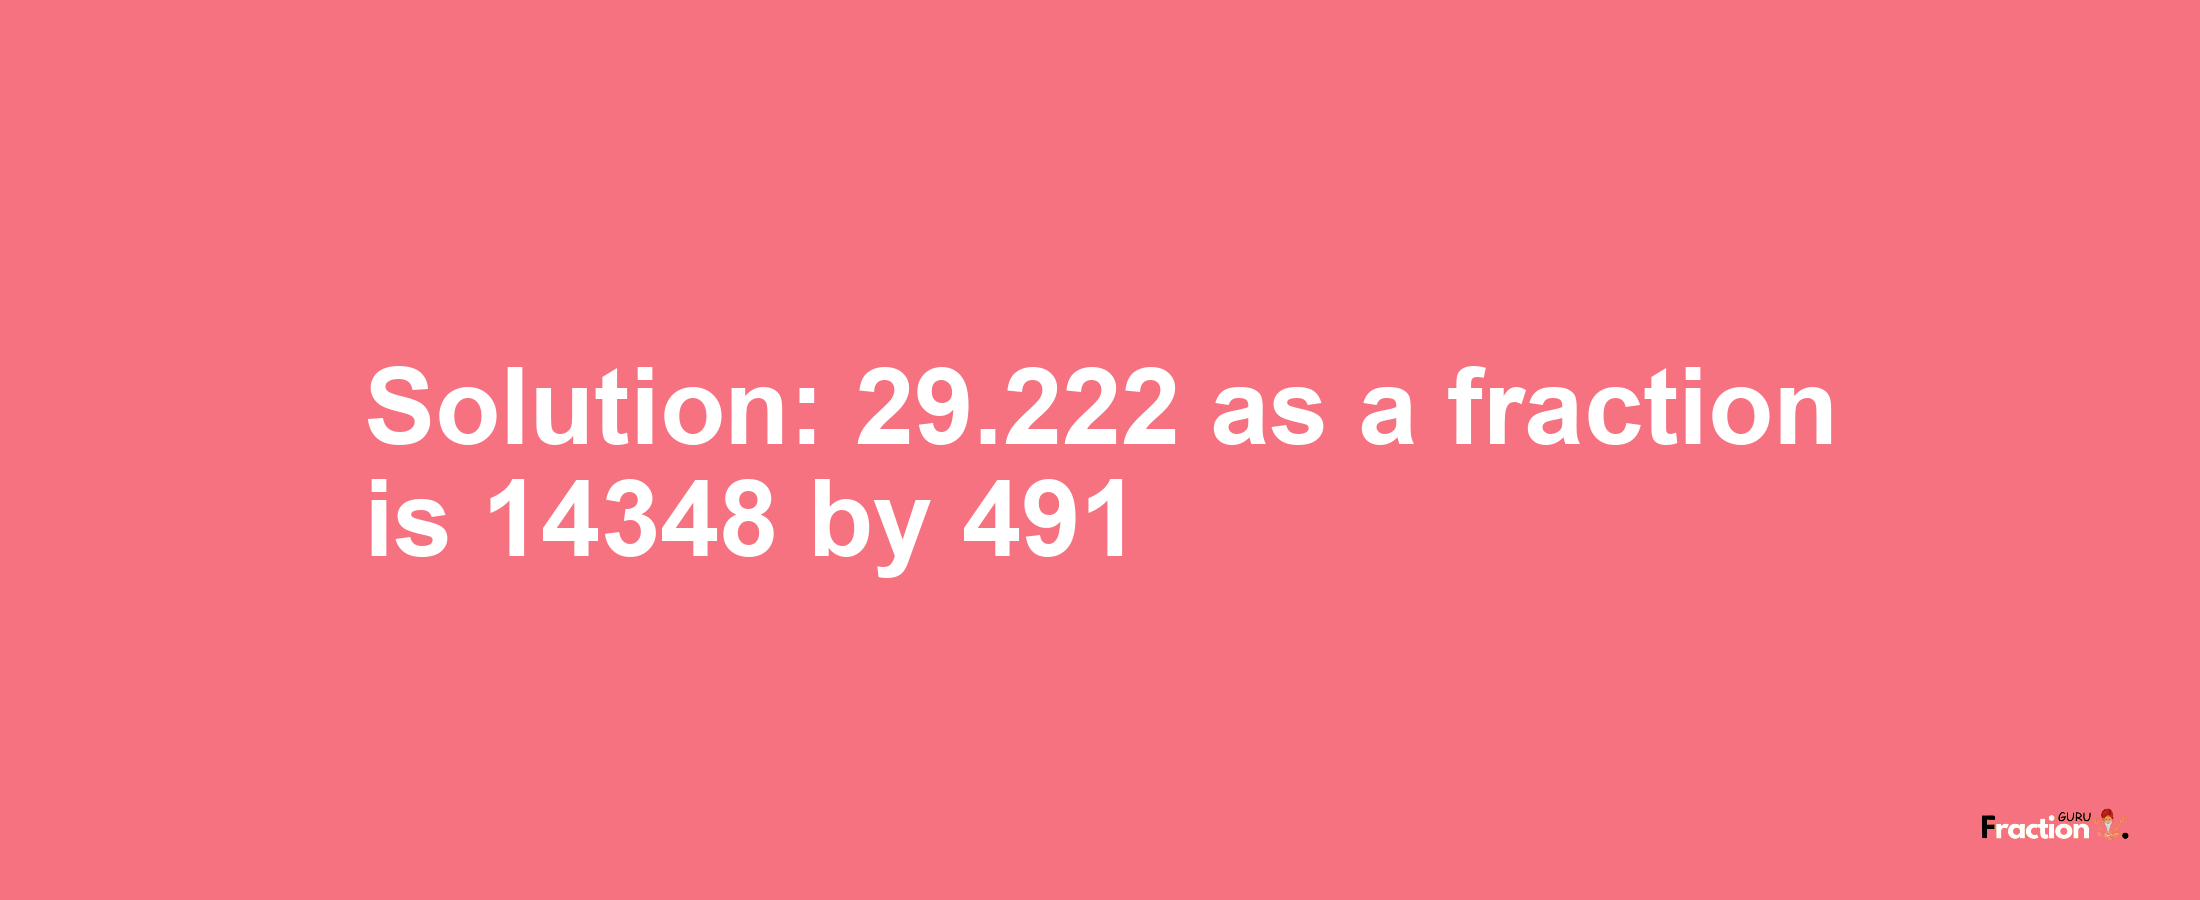 Solution:29.222 as a fraction is 14348/491